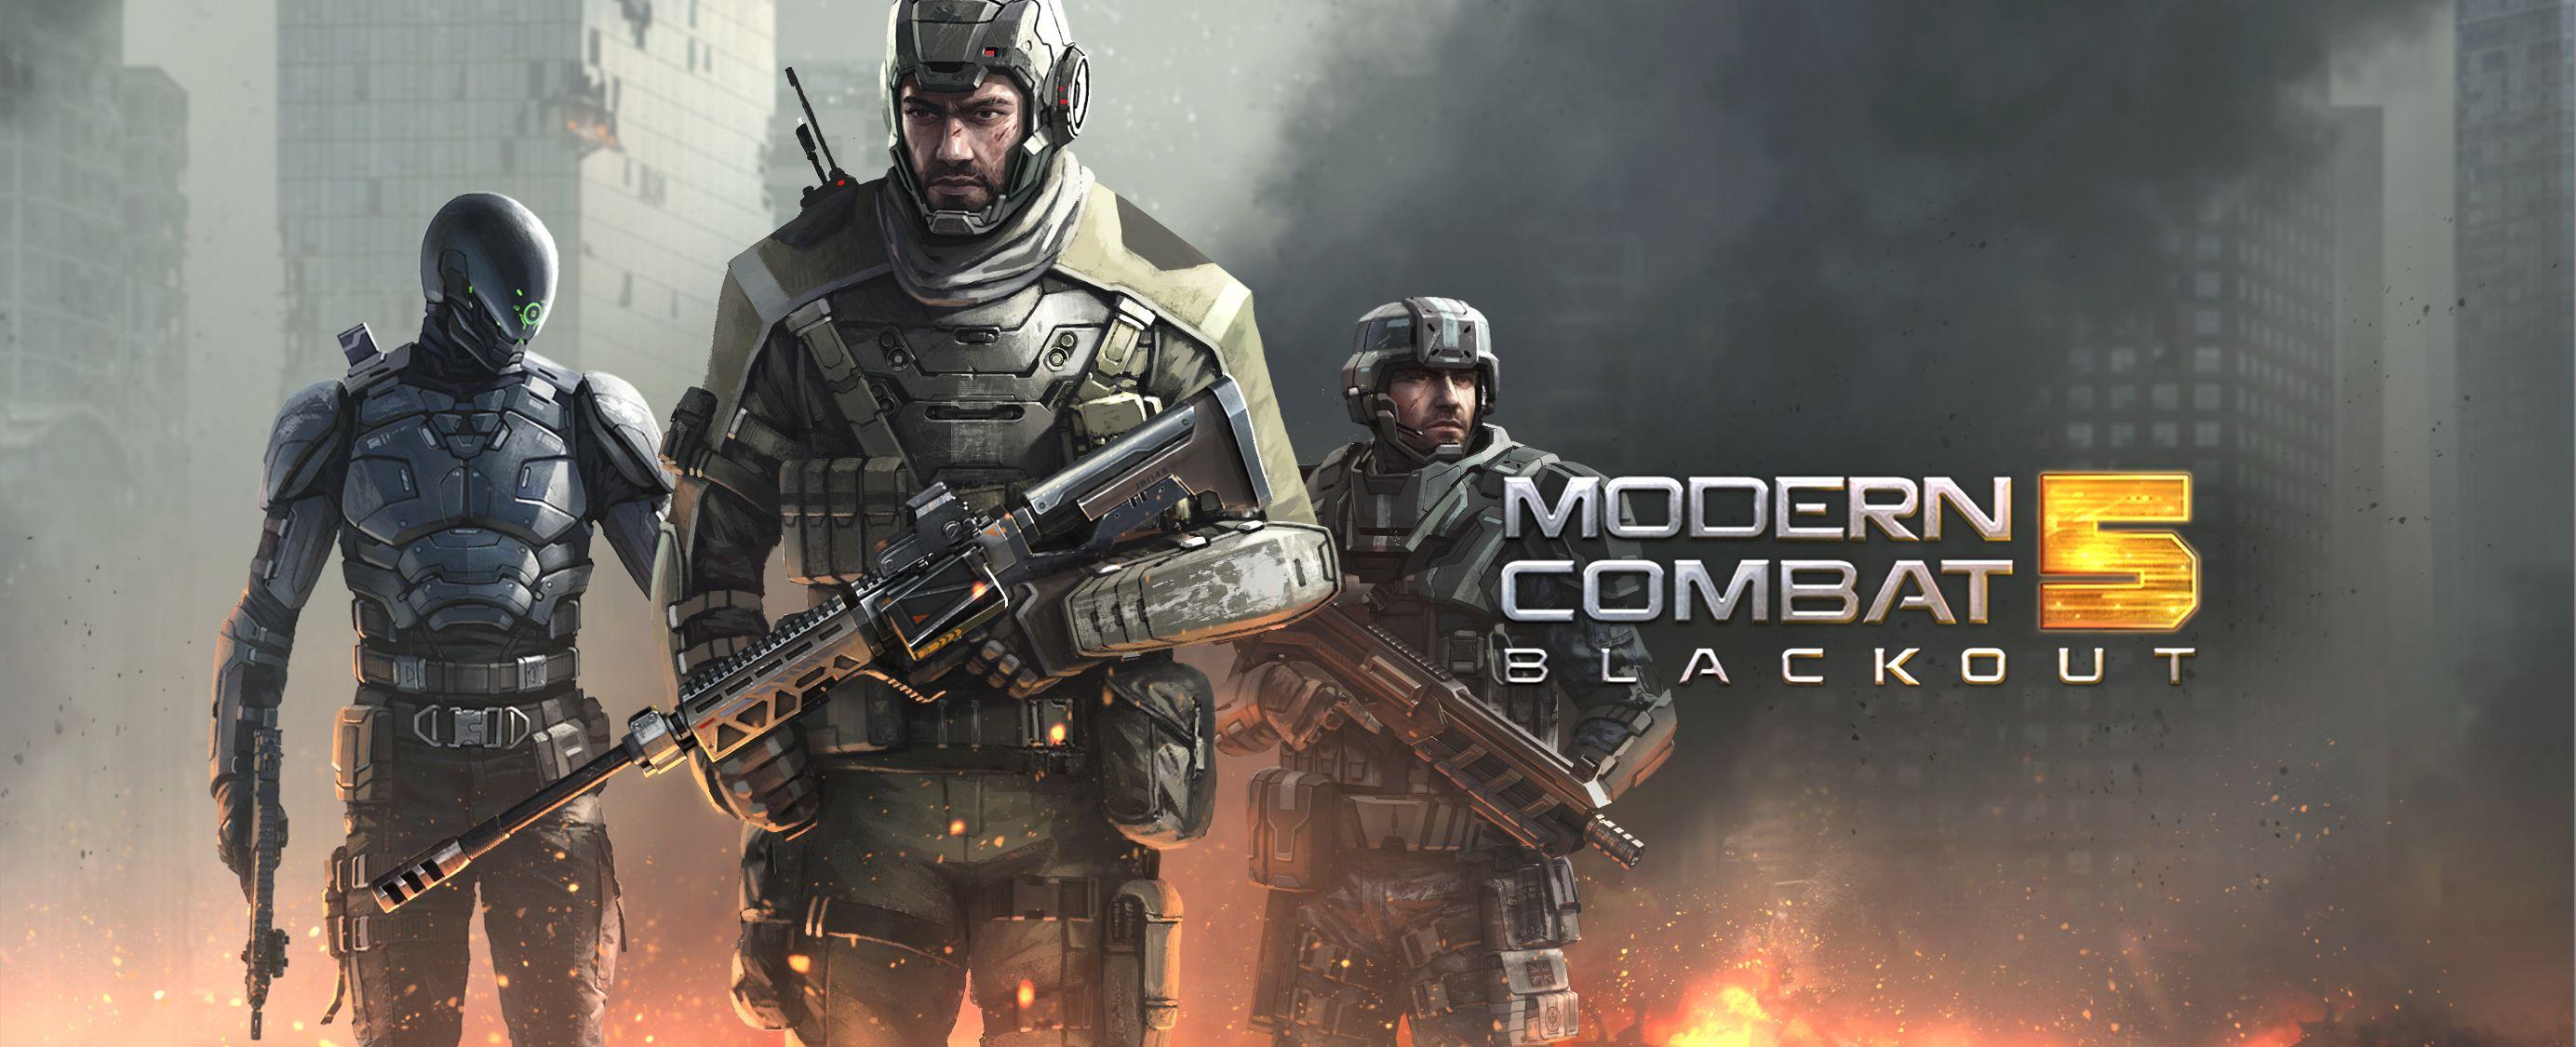 Modern Combat 5: Blackout Gets Tactical Suits and New Multiplayer